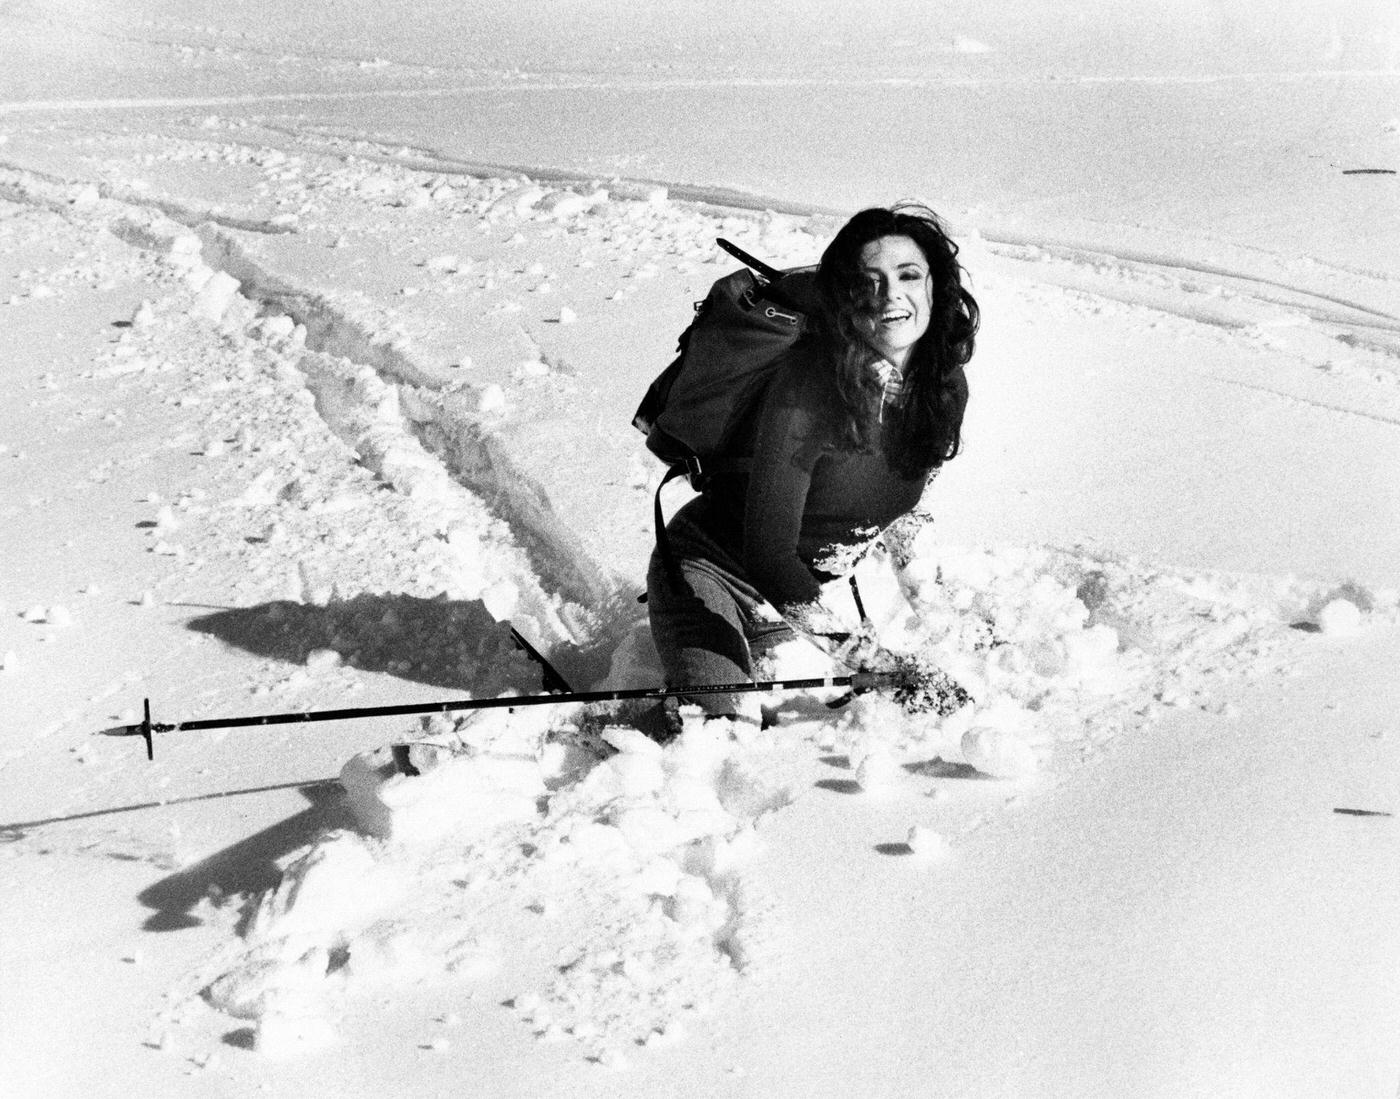 Italian singer Gigliola Cinquetti playing on the snow with a ski stick in her hand. San Giorgio, 1974.